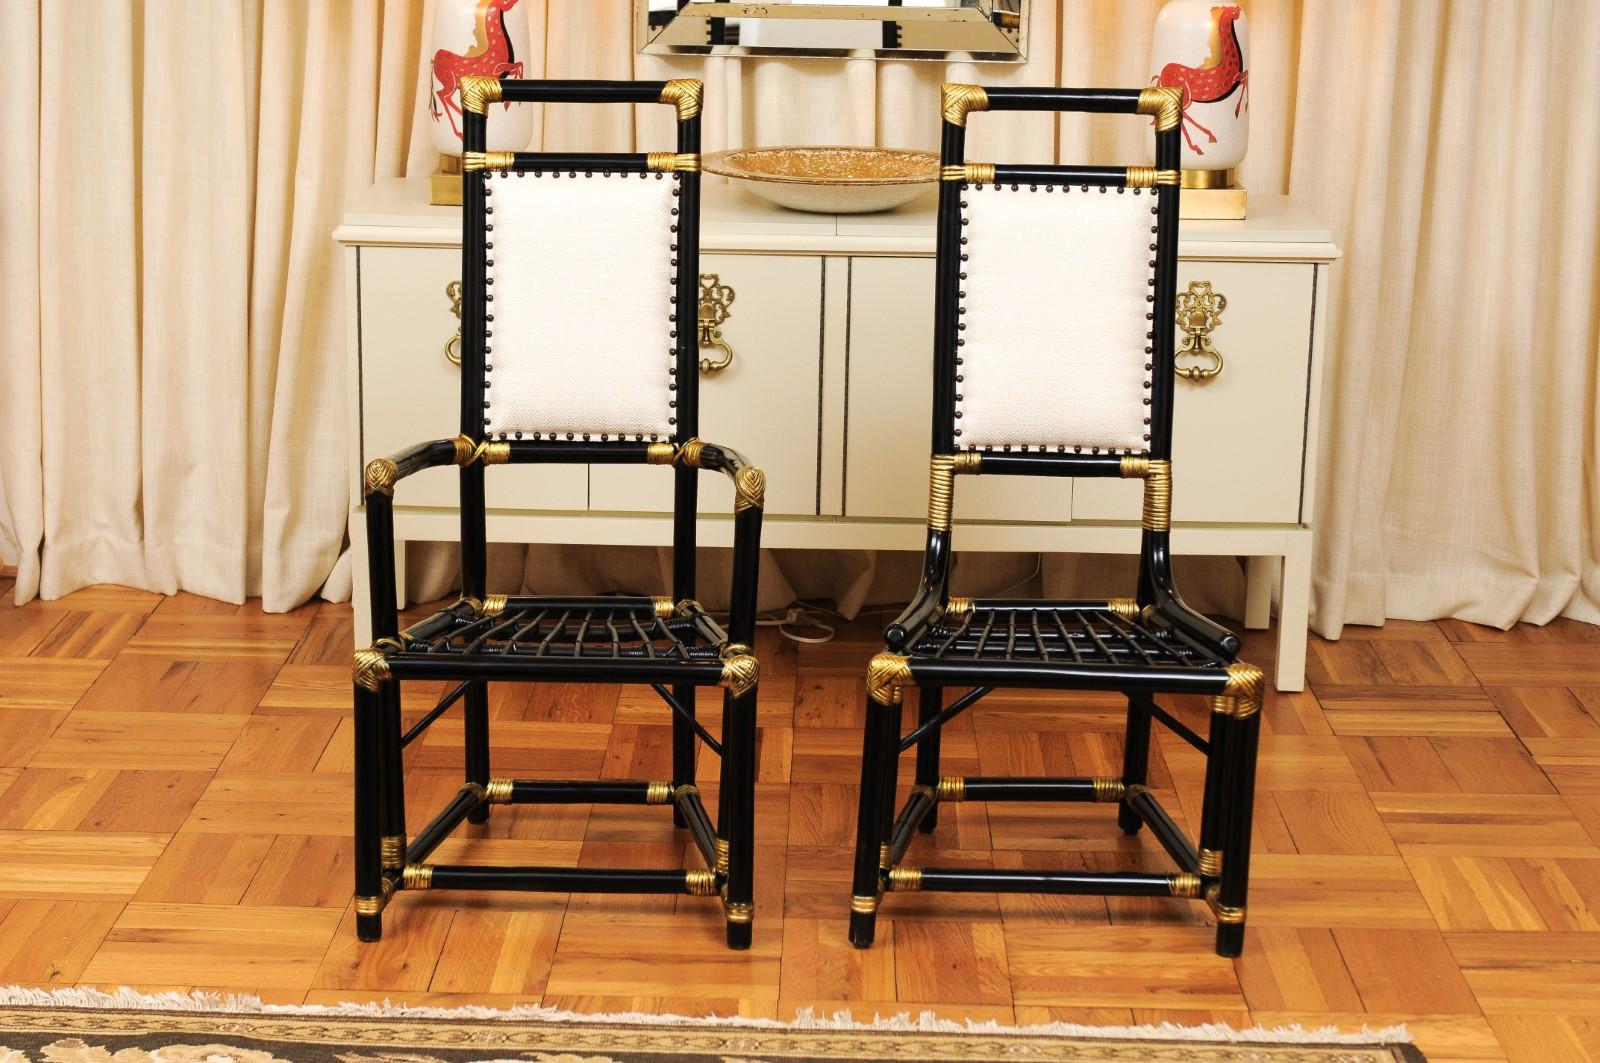 Regal Set of 12 Egyptian Revival Throne Dining Chairs by Henry Olko, circa 1955 For Sale 11